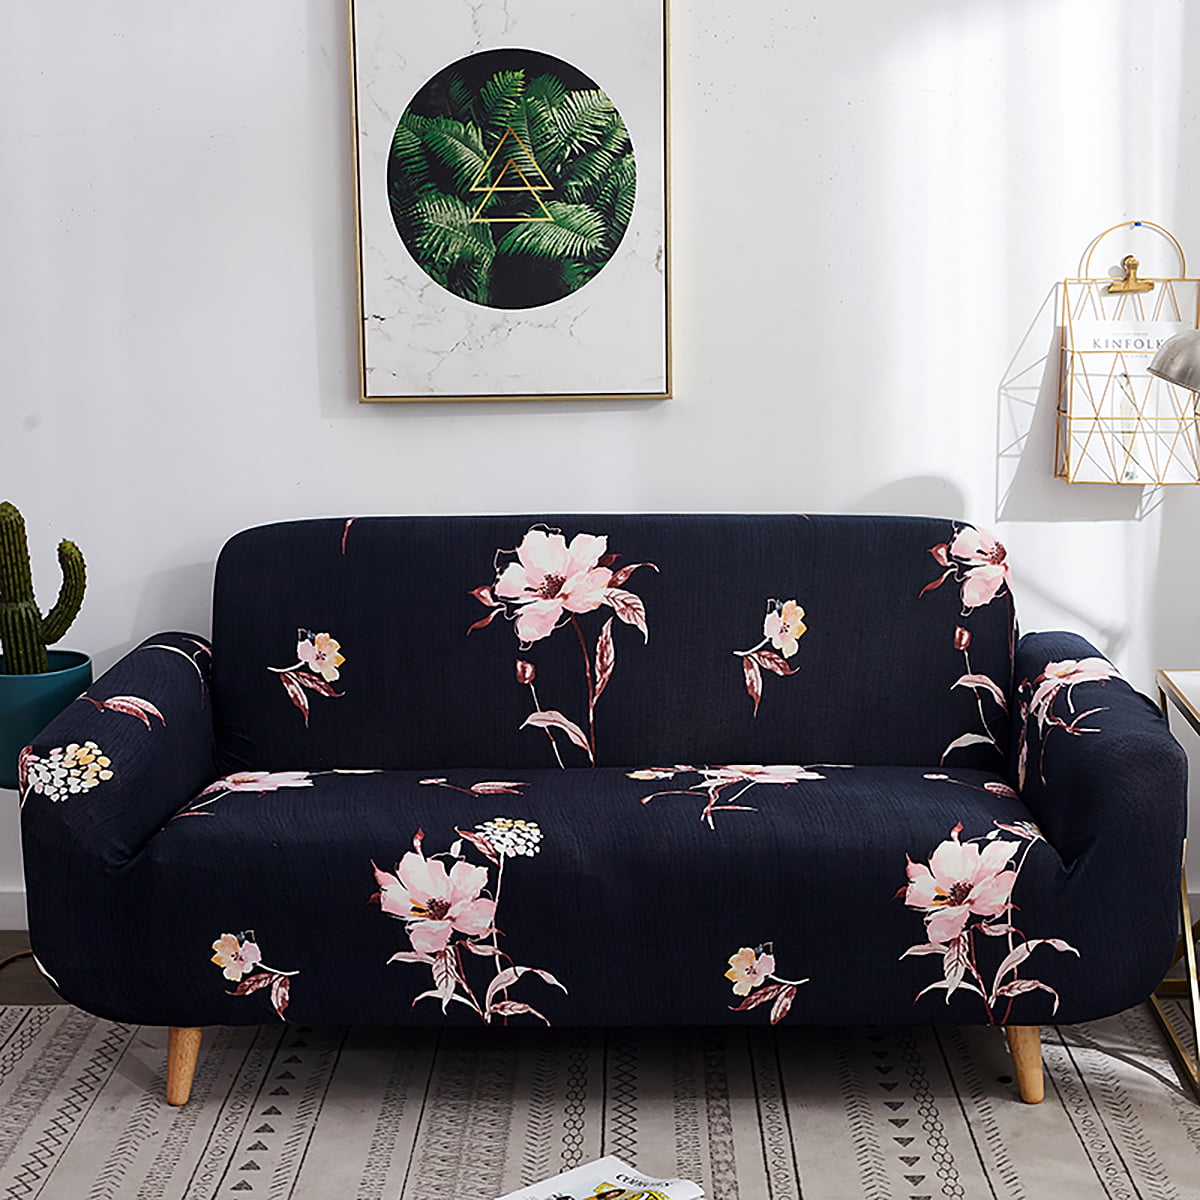 Details about   Colorful Stretch Sofa Cover  Room Sectional Couch Cover Geometric 1/4 Seater 